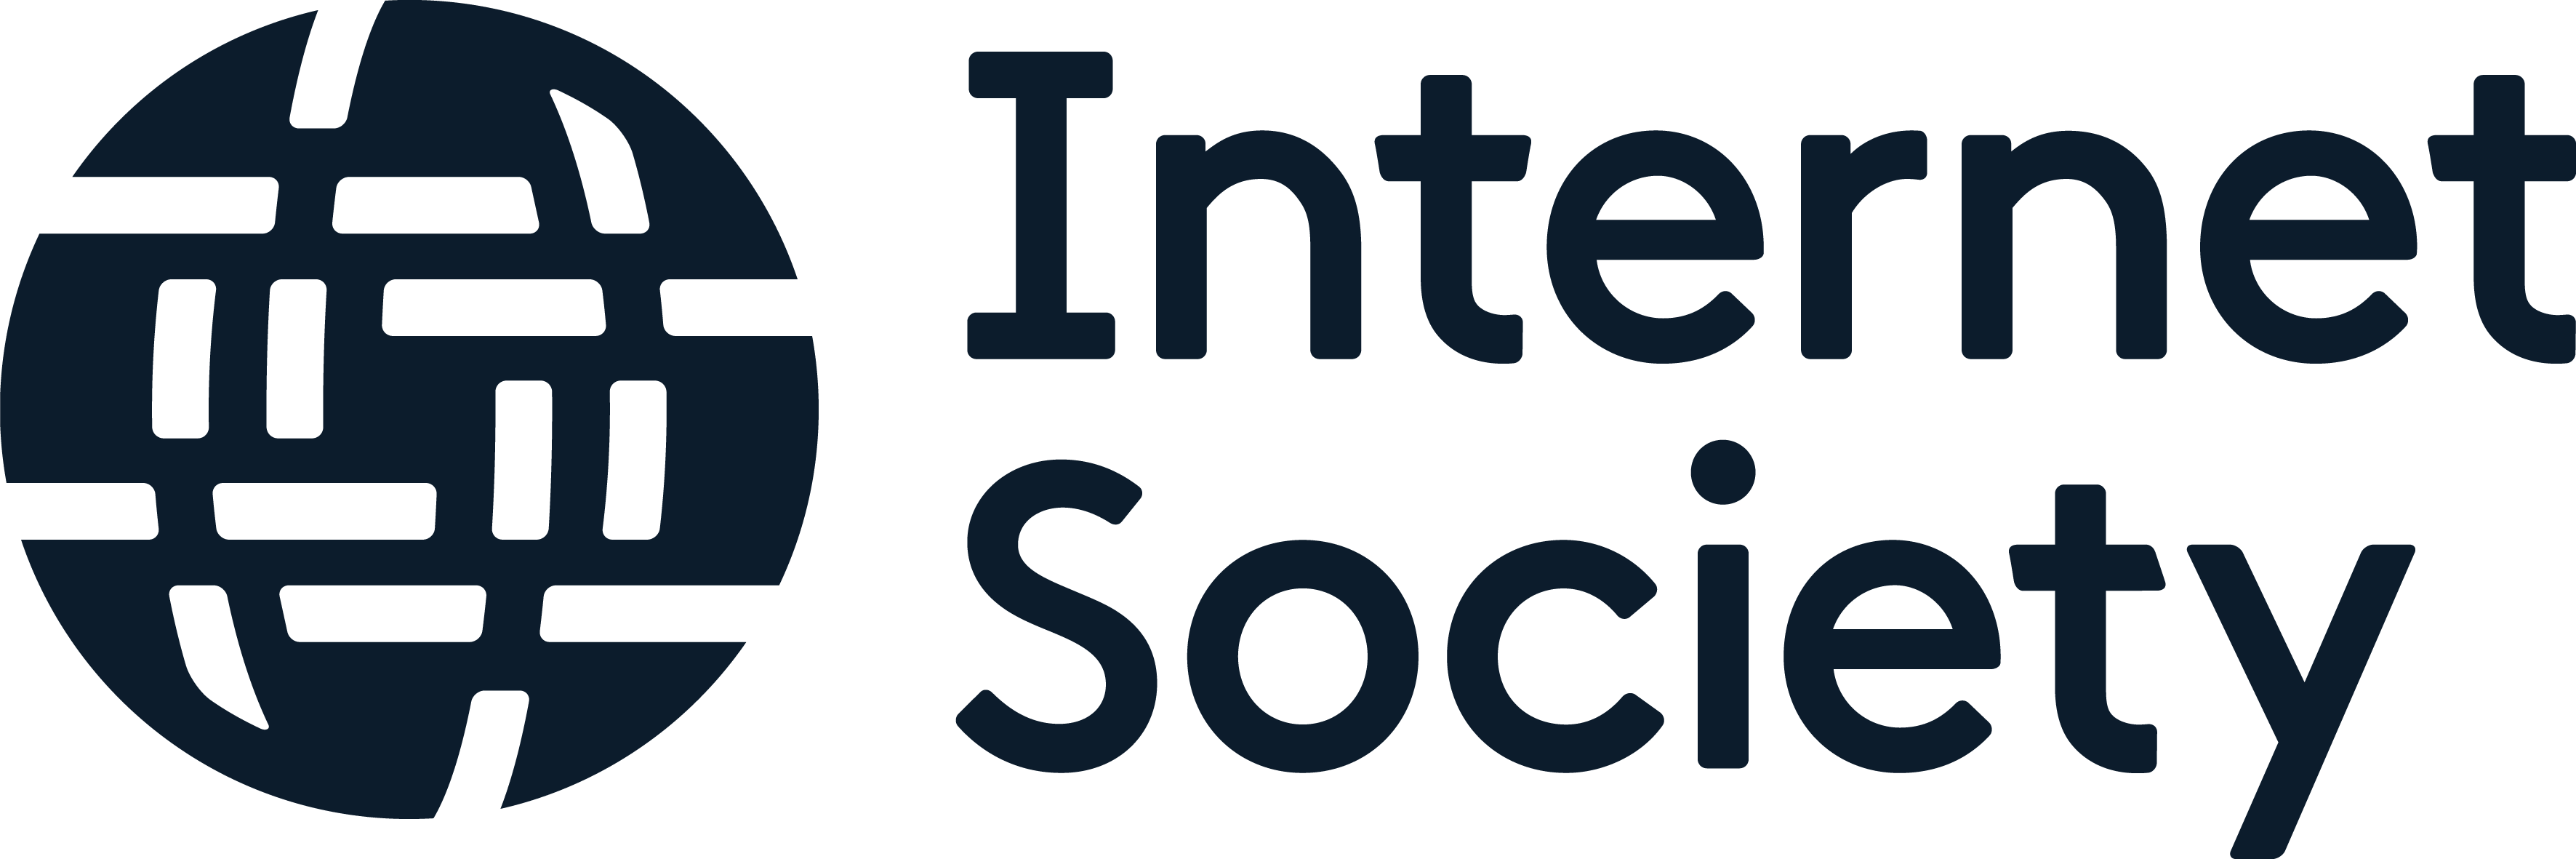 The image shows the ISOC logo